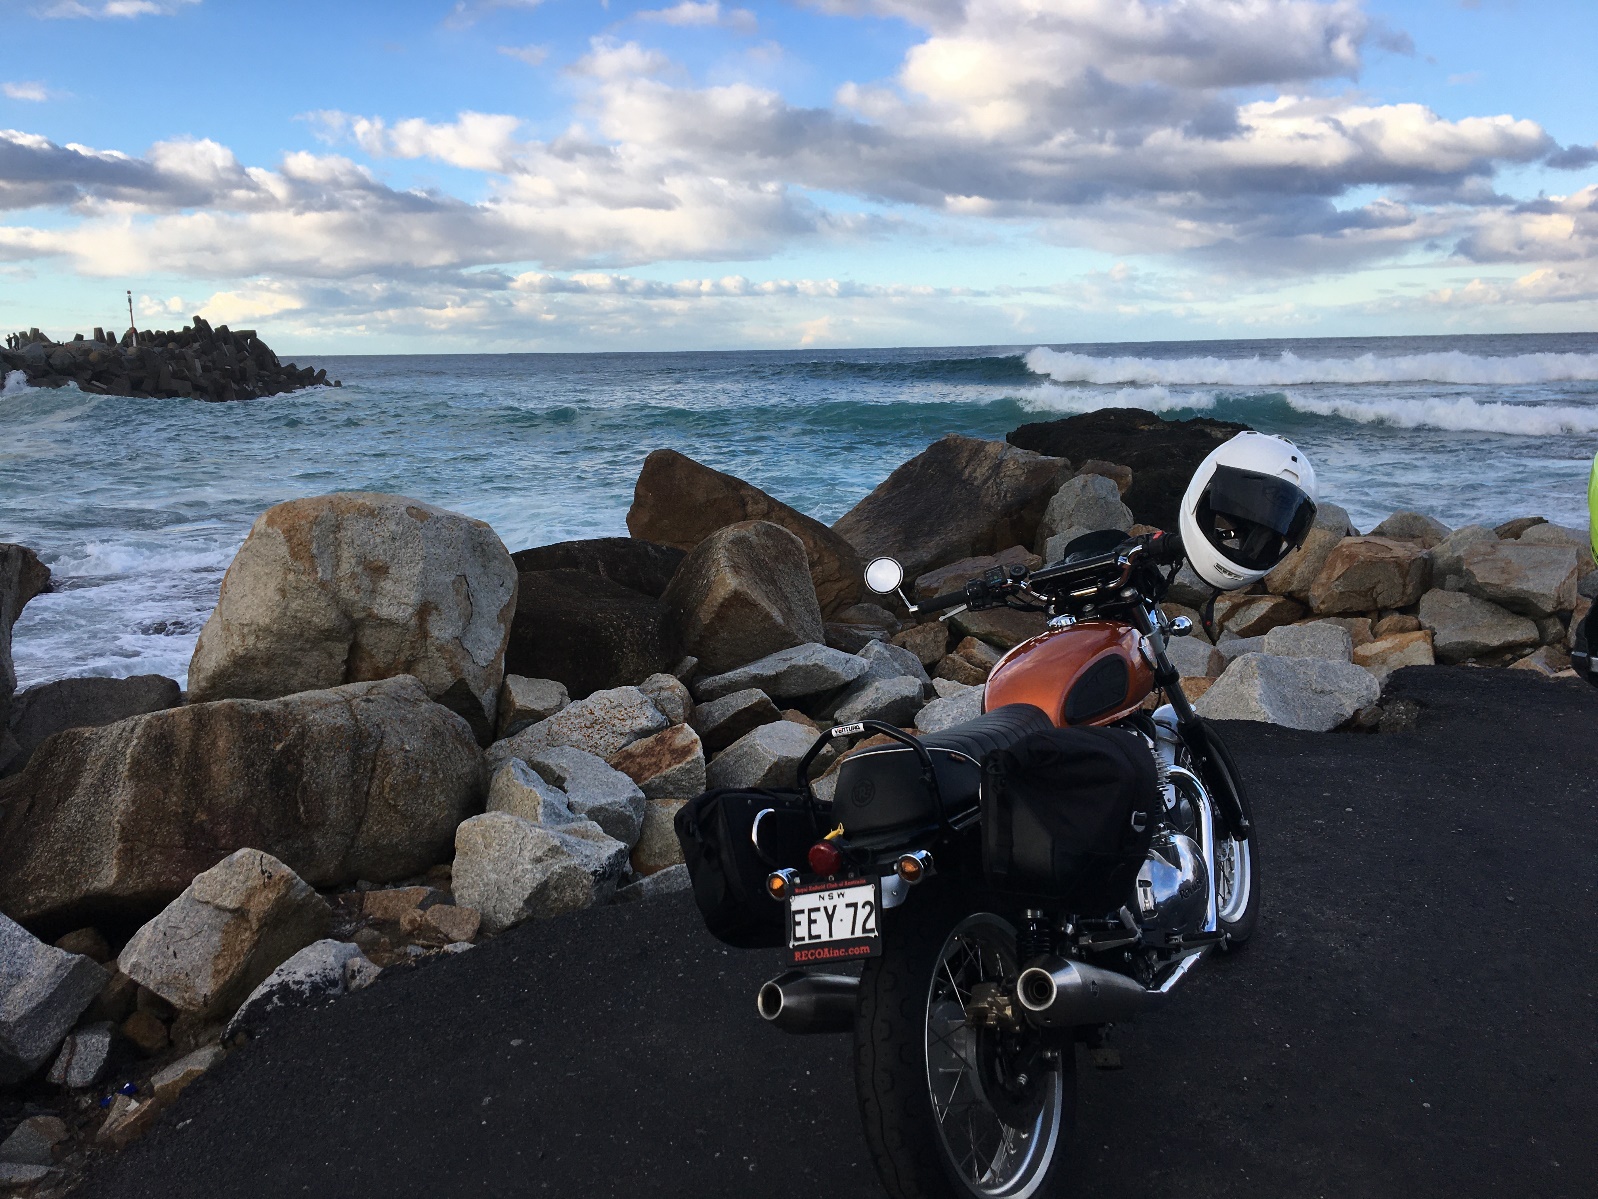 A motorcycle parked on a rocky beach Description automatically generated with medium confidence